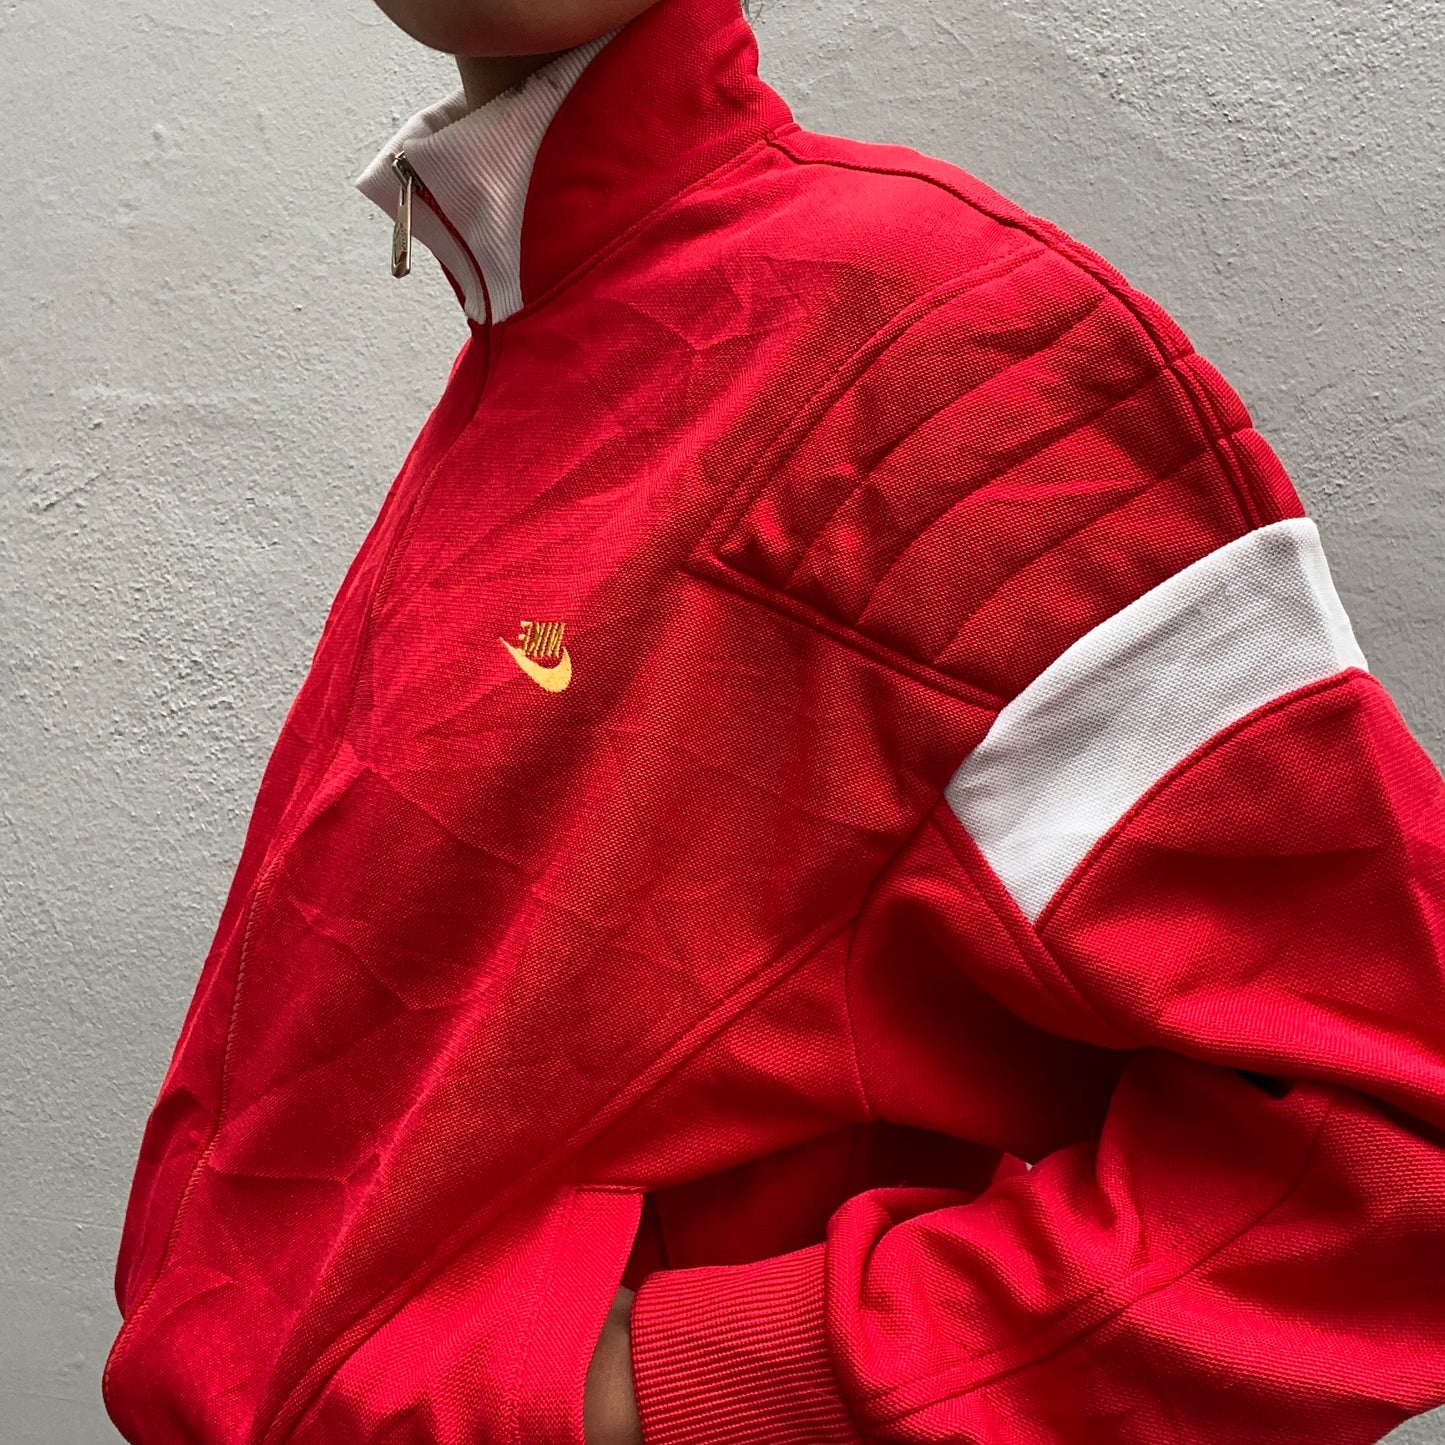 Red nike track suit 80s side